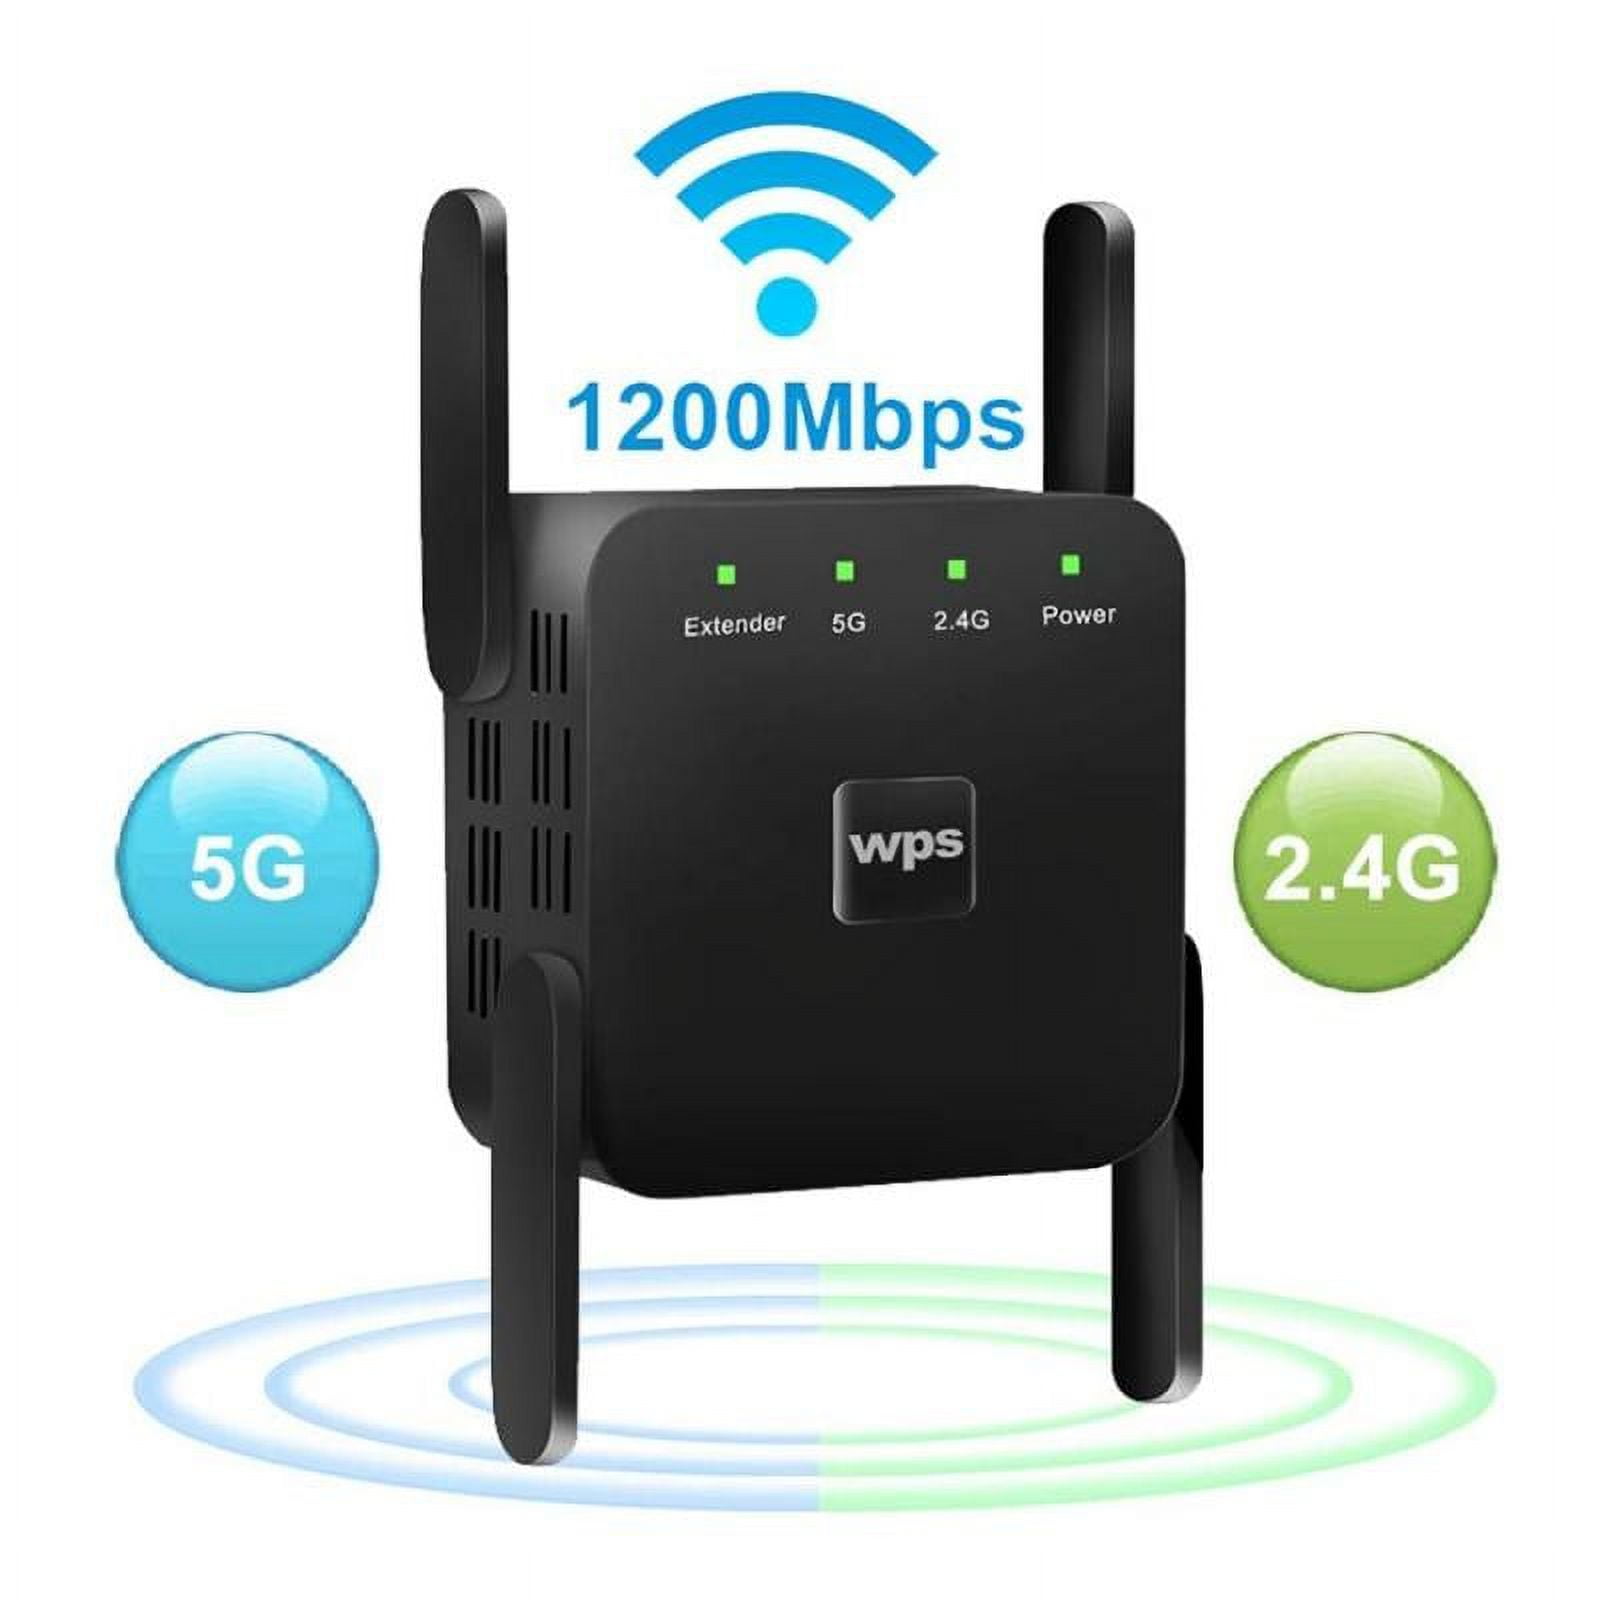 Home WiFi Extender Repeater 360 Degree Full Coverage Booster 